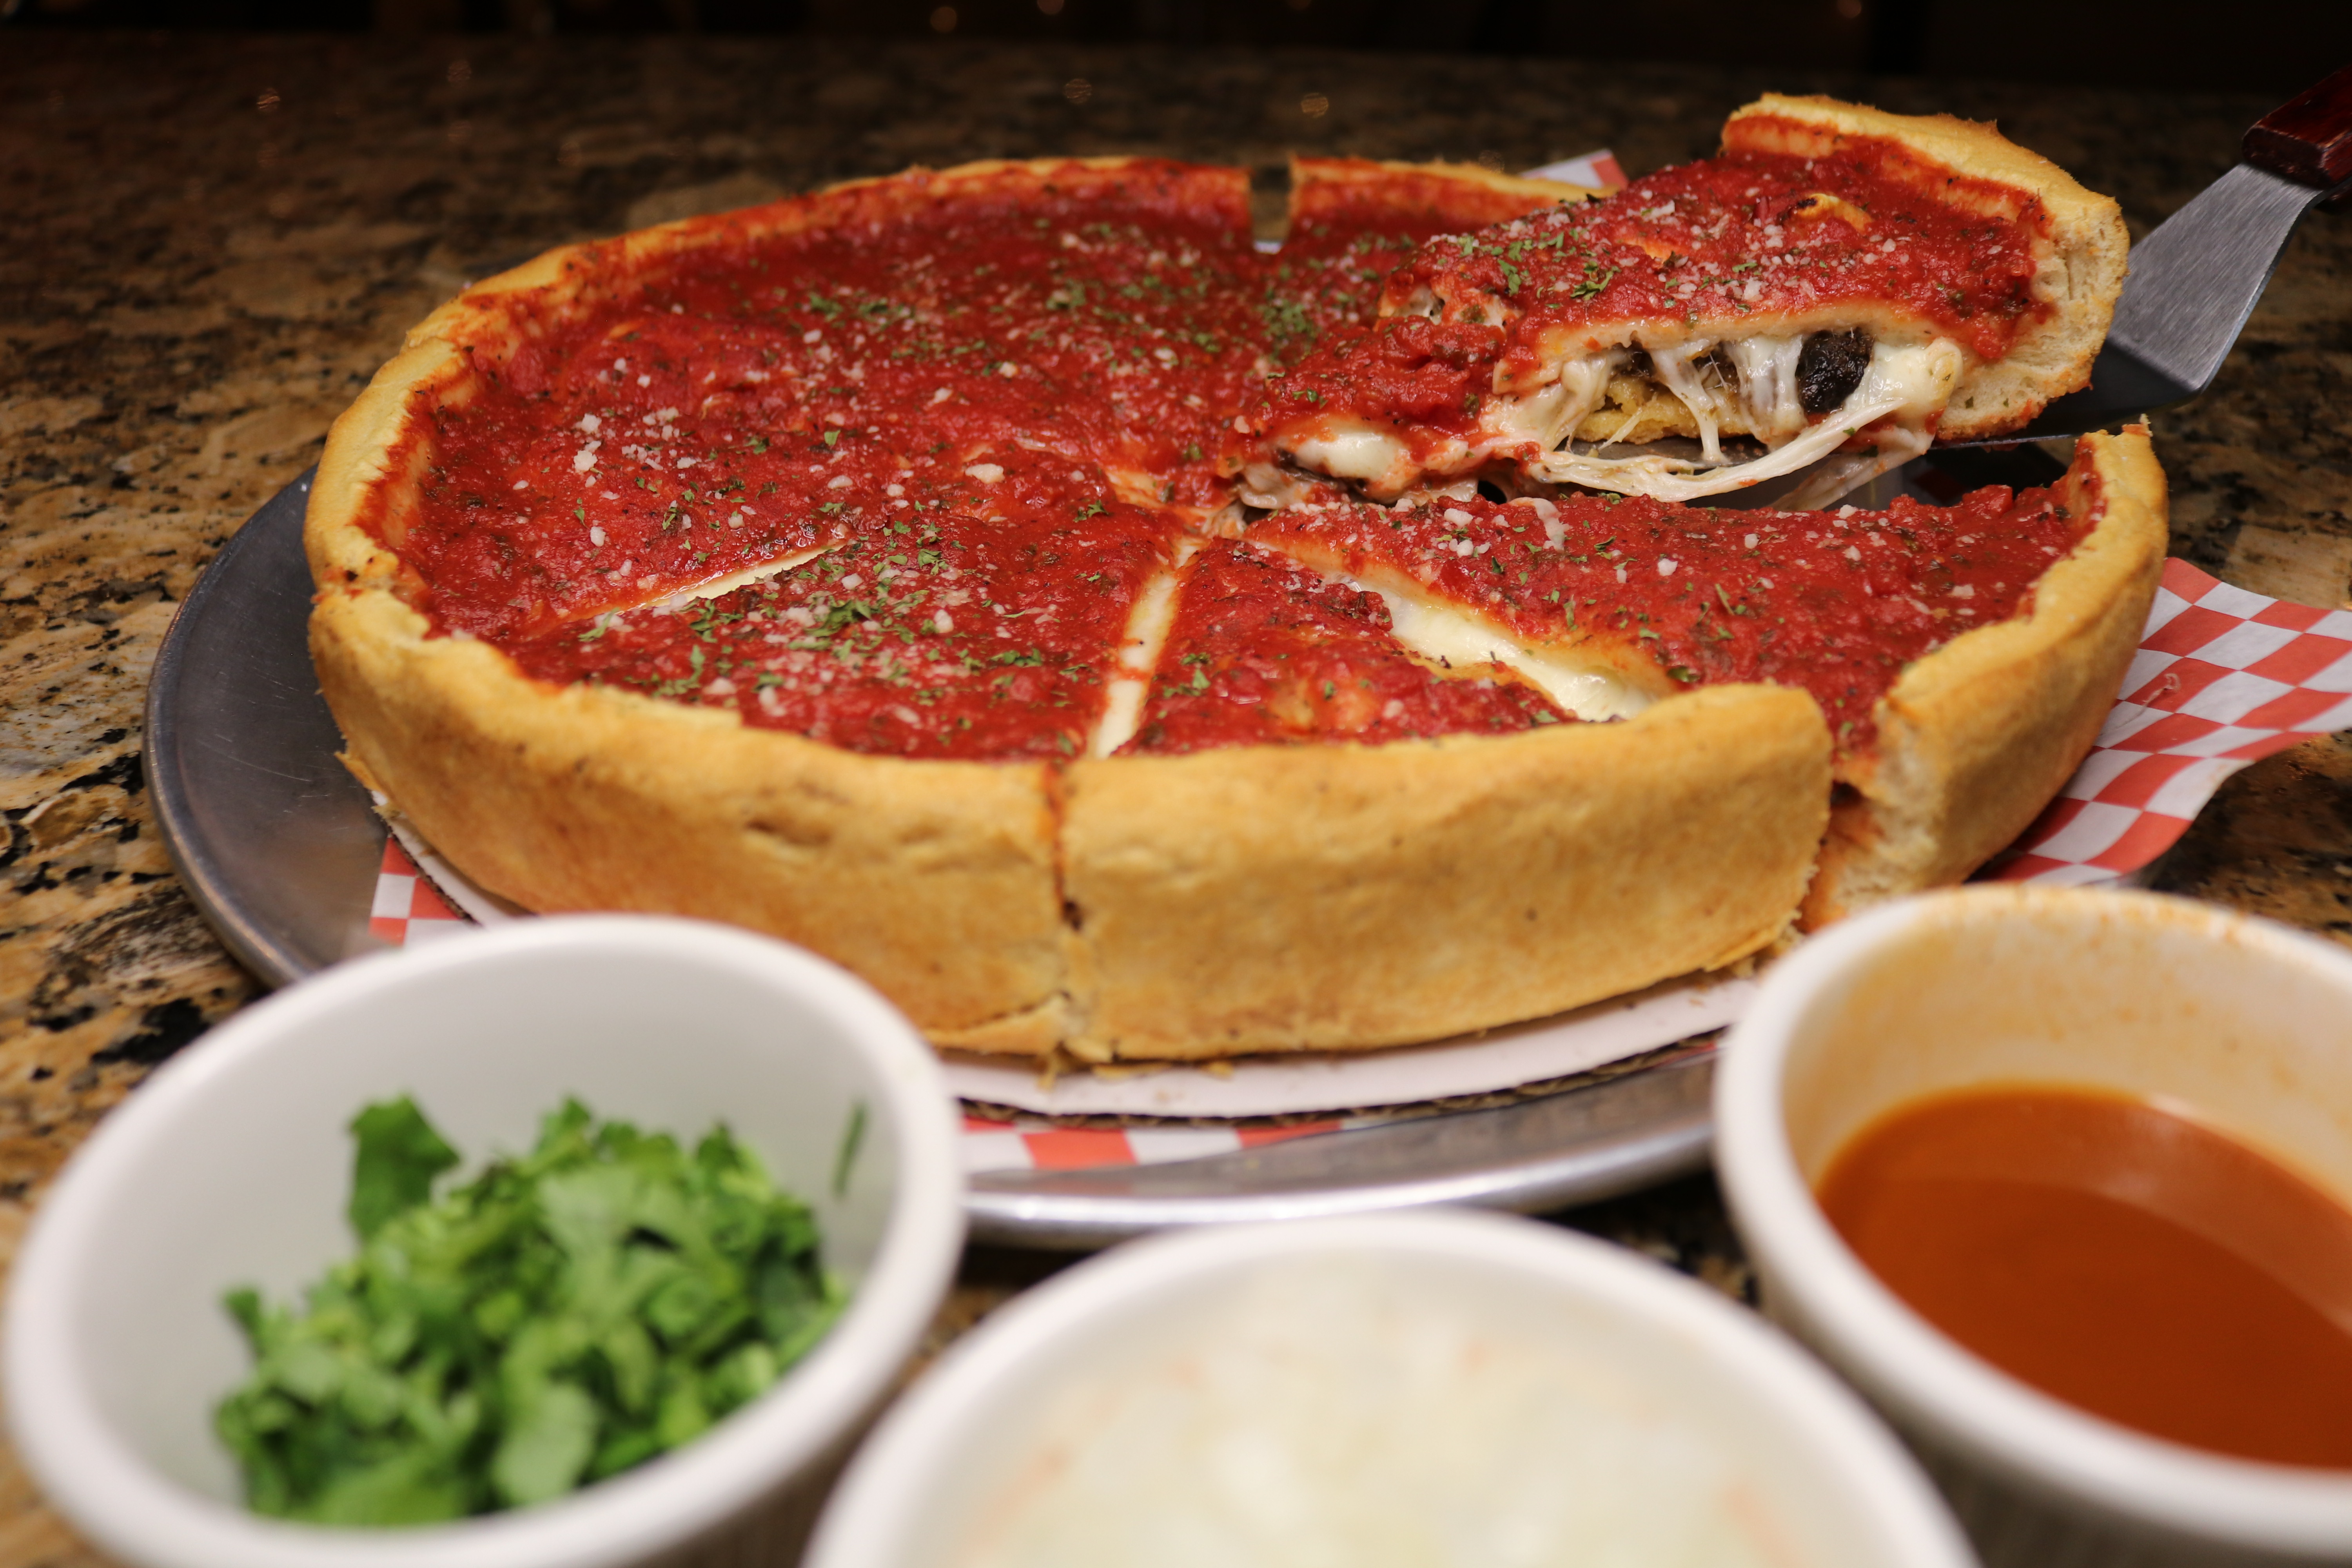 A spatula lifts up a single wedge from a deep dish pizza; bowls of cilantro, onions, and consomme in the foreground